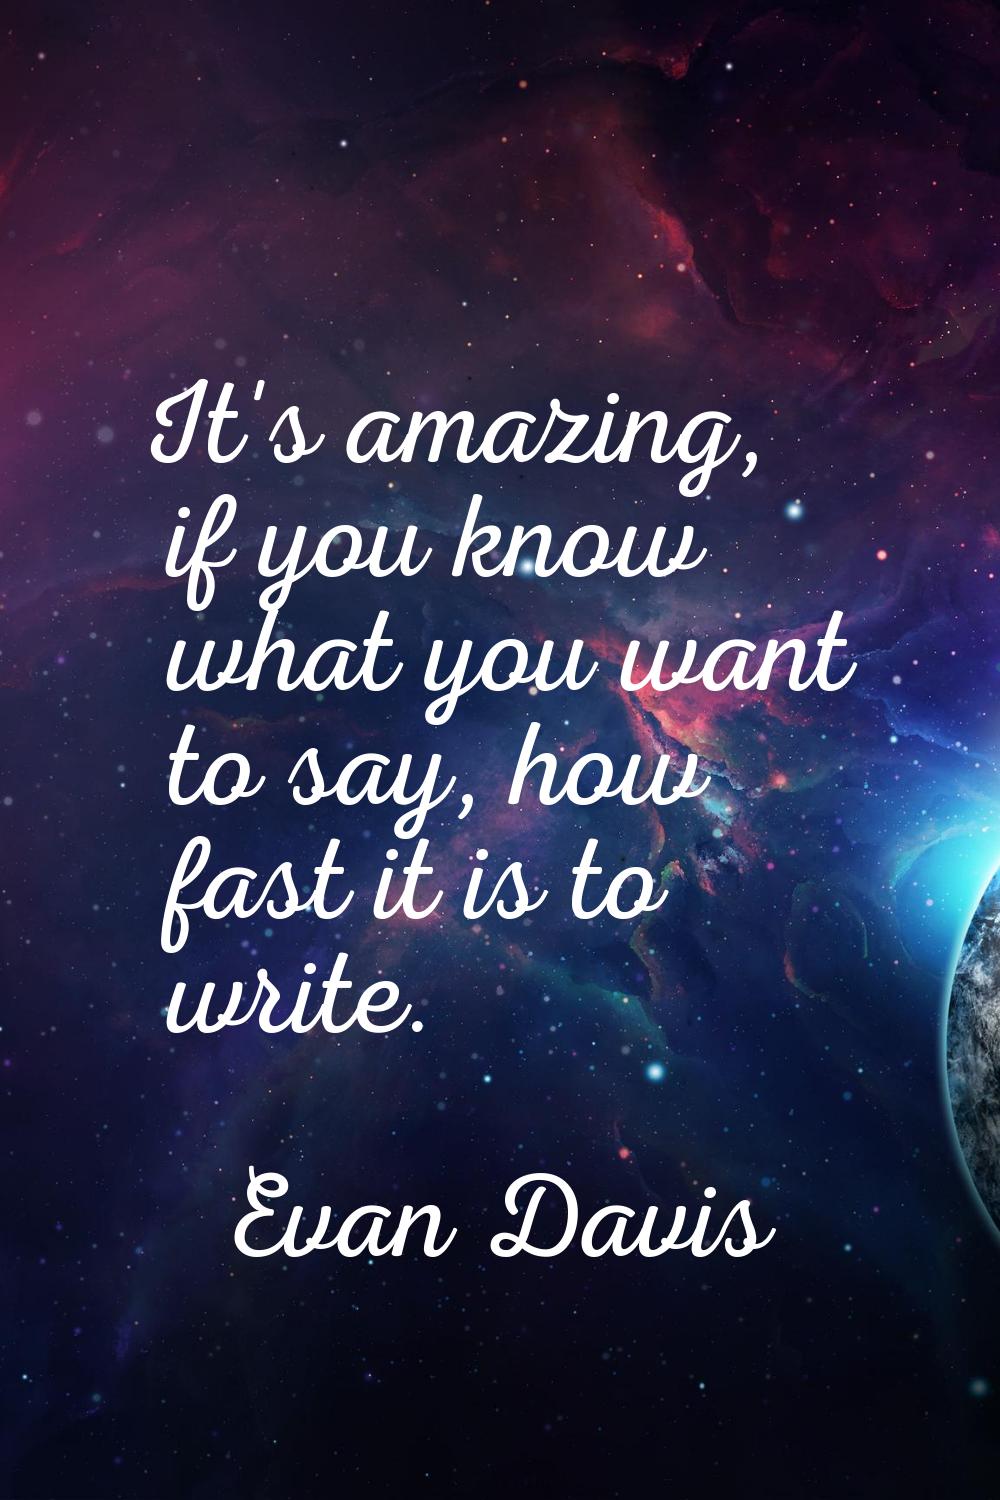 It's amazing, if you know what you want to say, how fast it is to write.